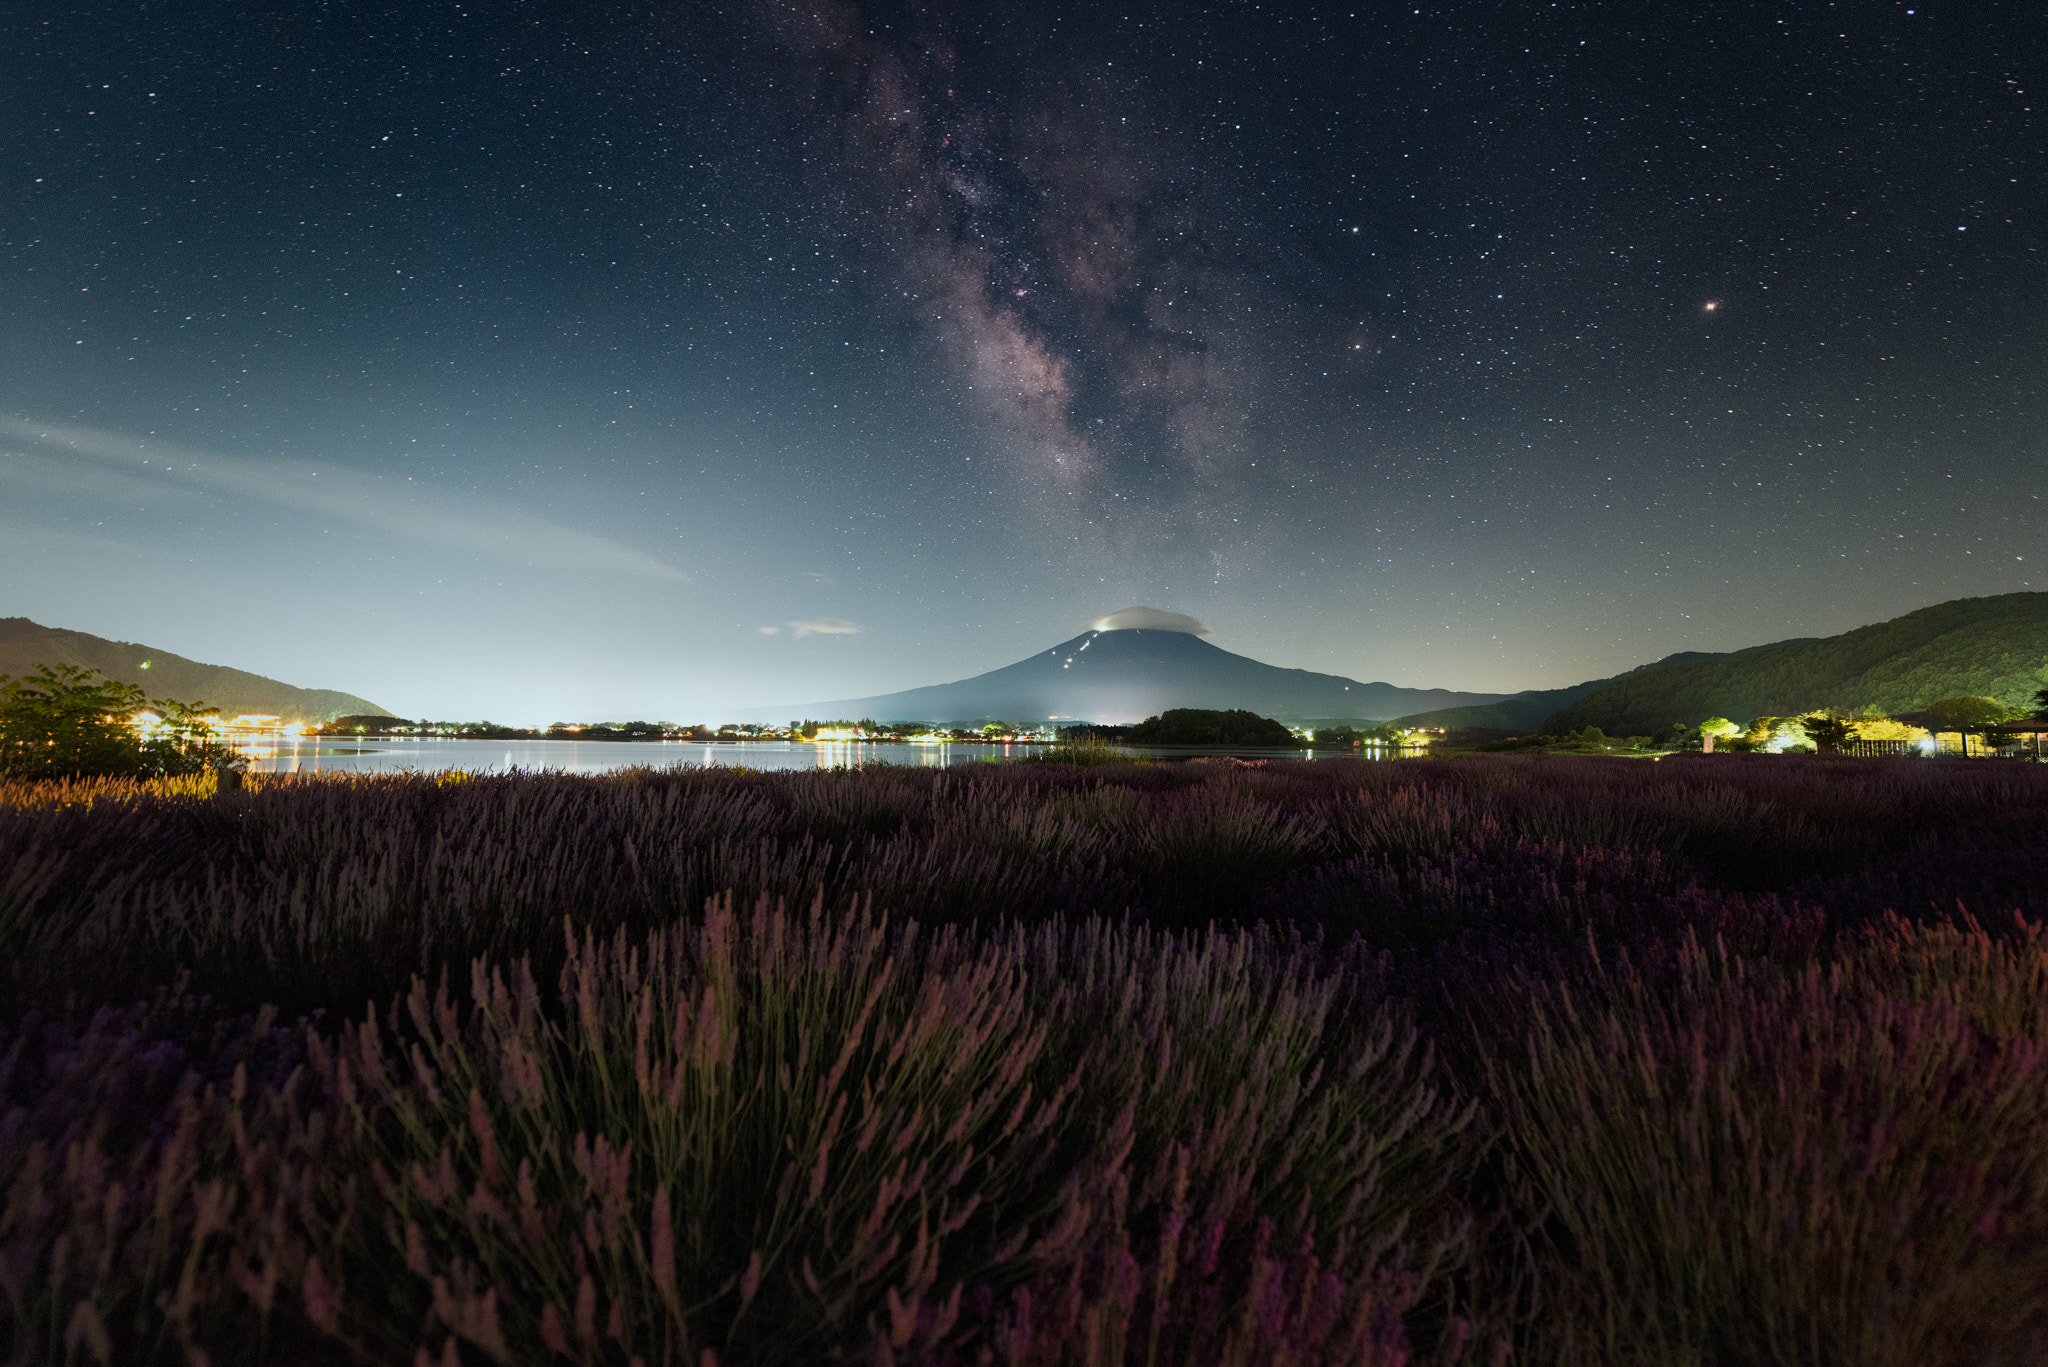 Nikon D810A sample photo. The milky way & mt. fuji over lavender bushes photography